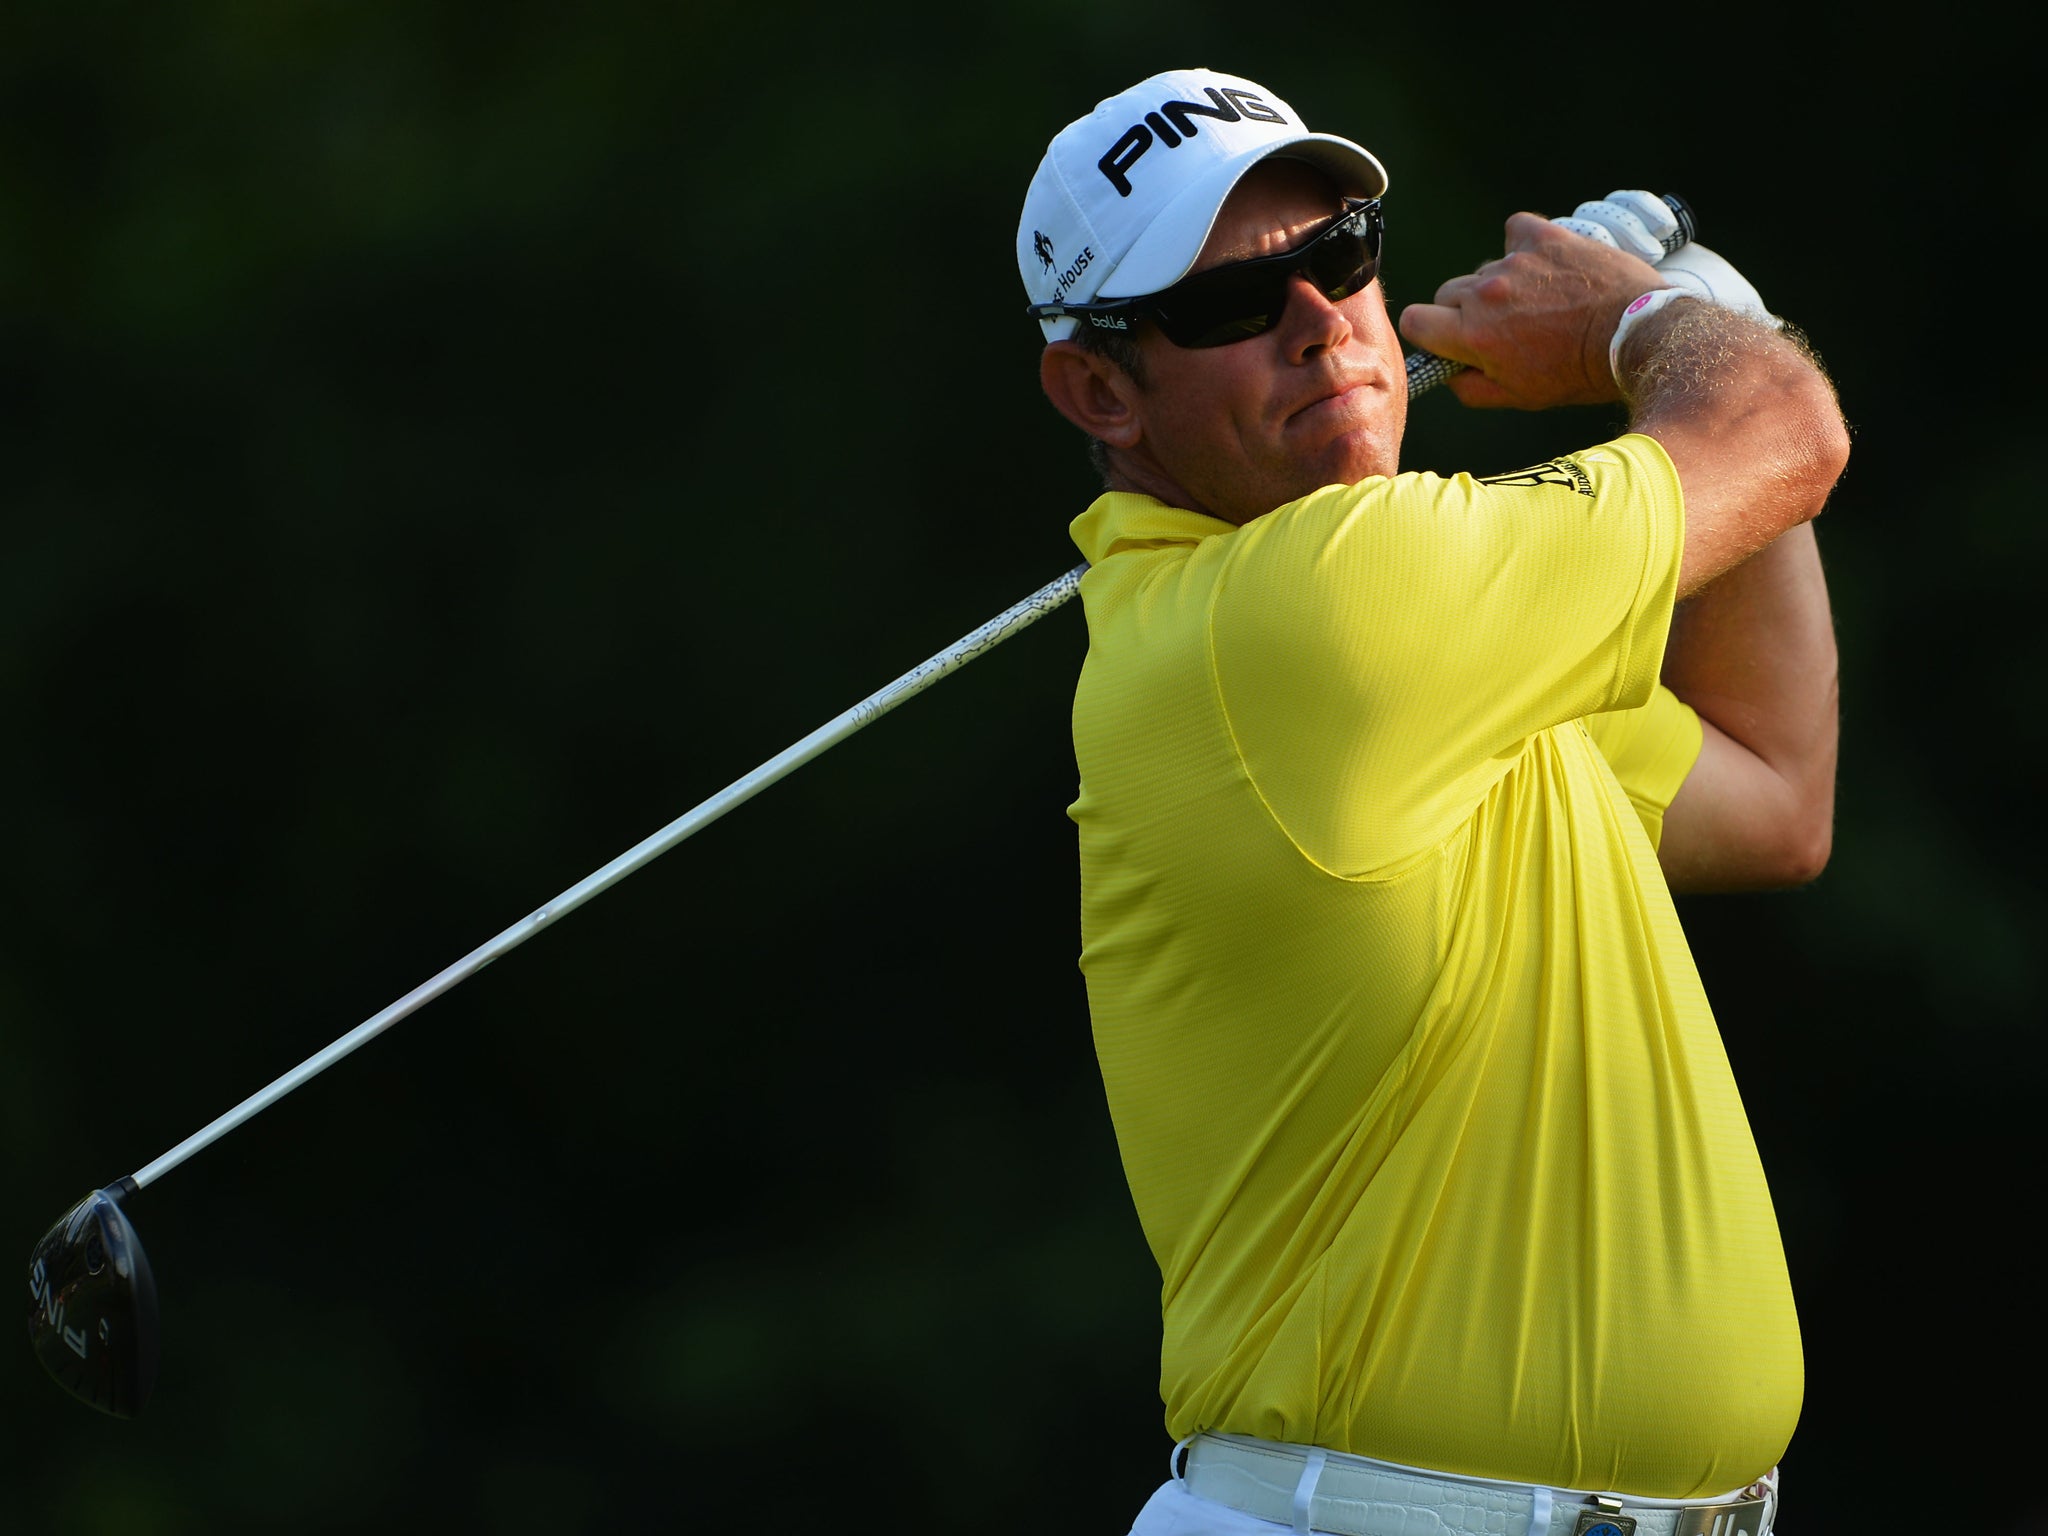 Lee Westwood in action during the US PGA Championship at Oak Hill